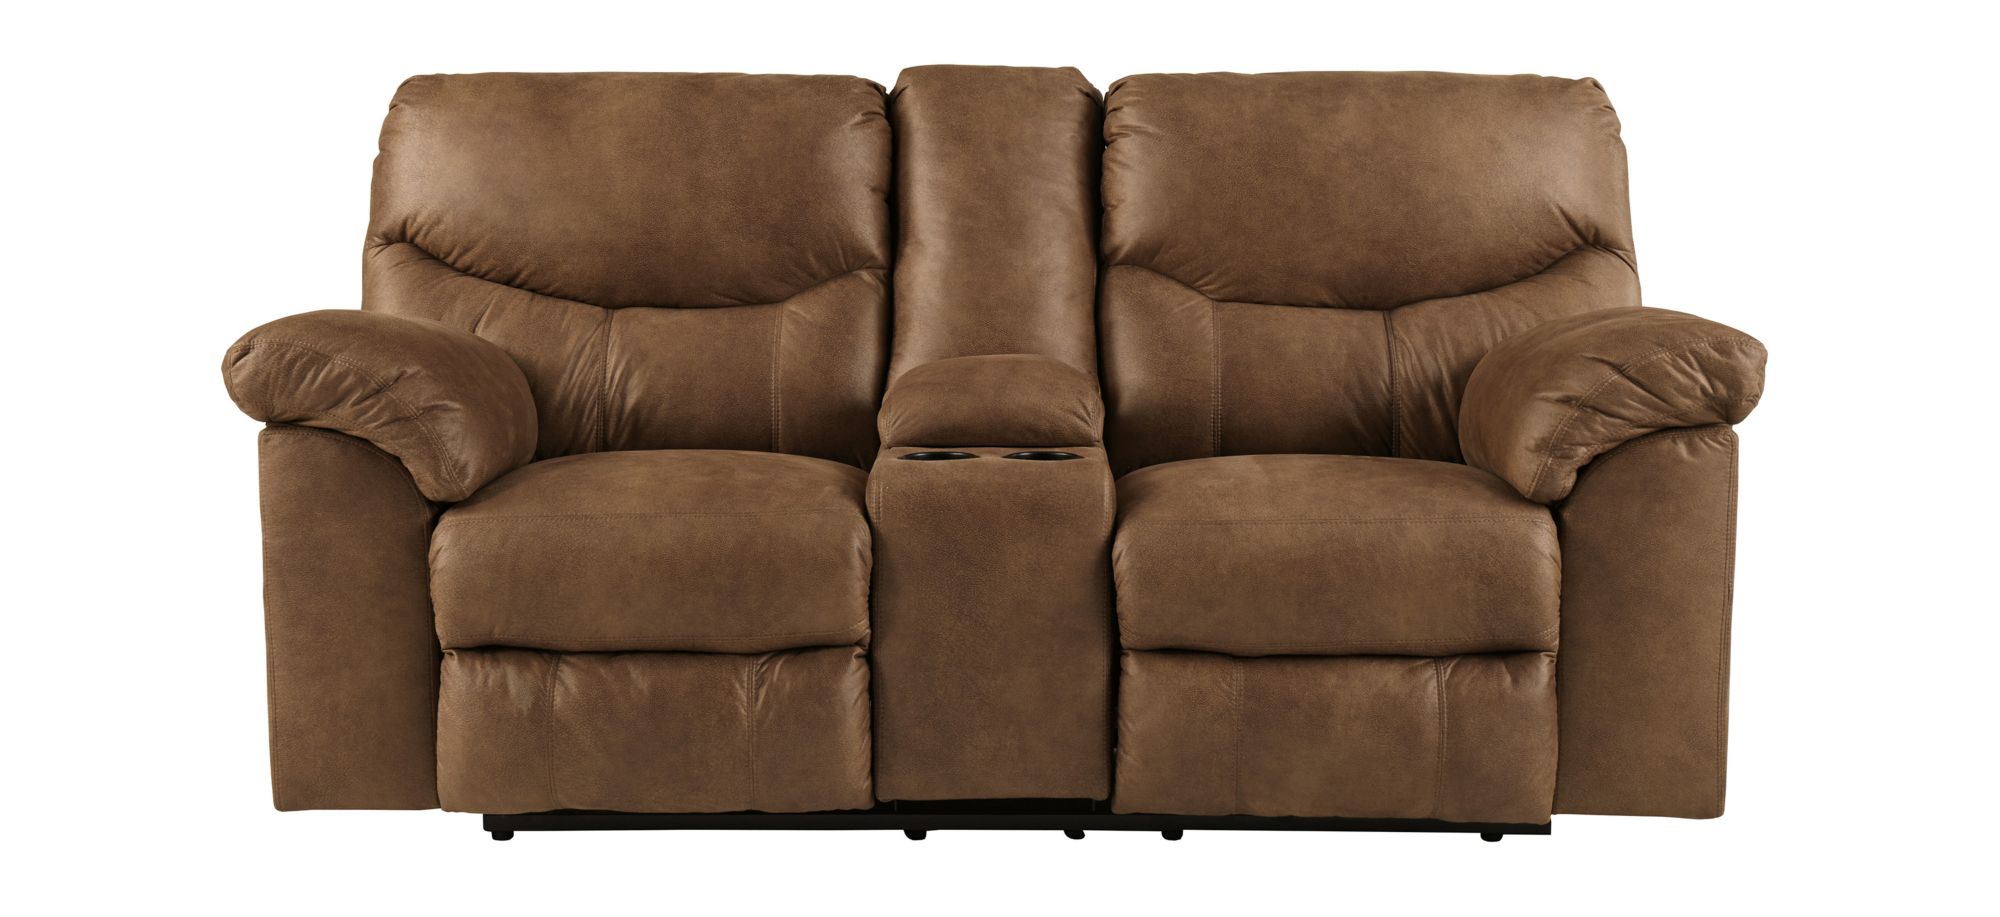 Boxberg Reclining Console Loveseat in Bark by Ashley Furniture